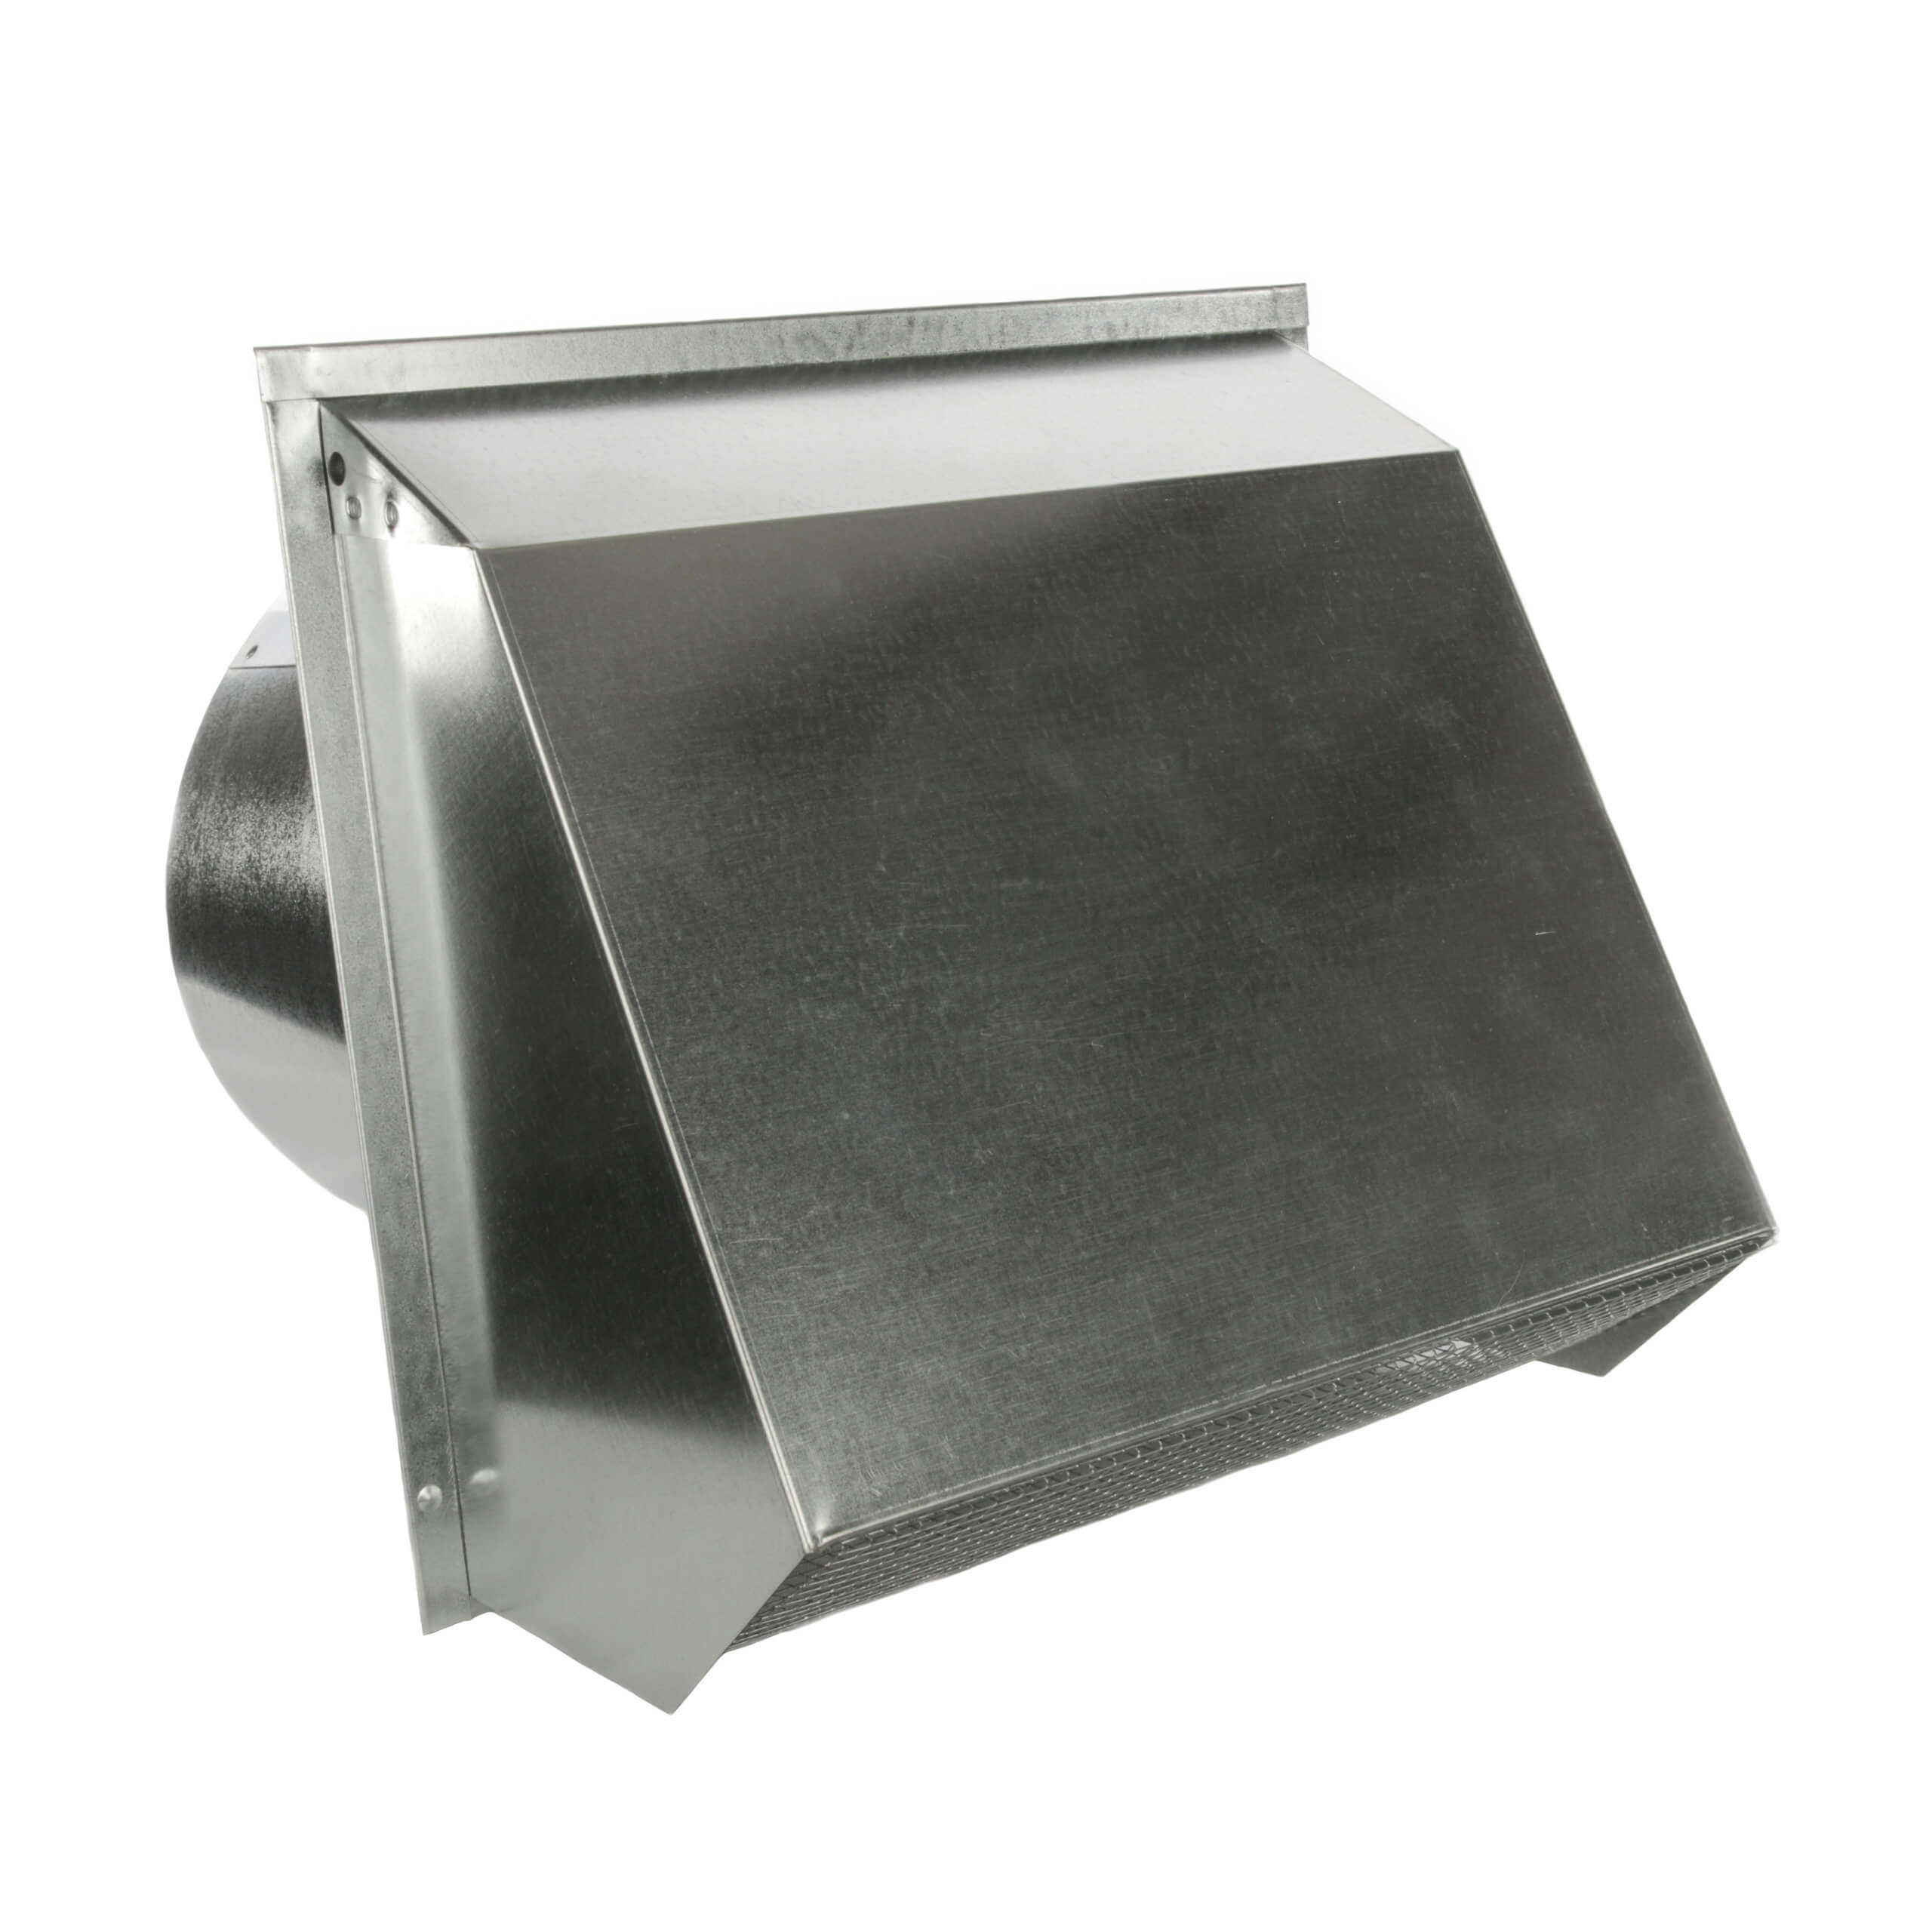 Front view of FAMCO Hooded Wall Vent with damper, gasket, and screen in galvanized steel.